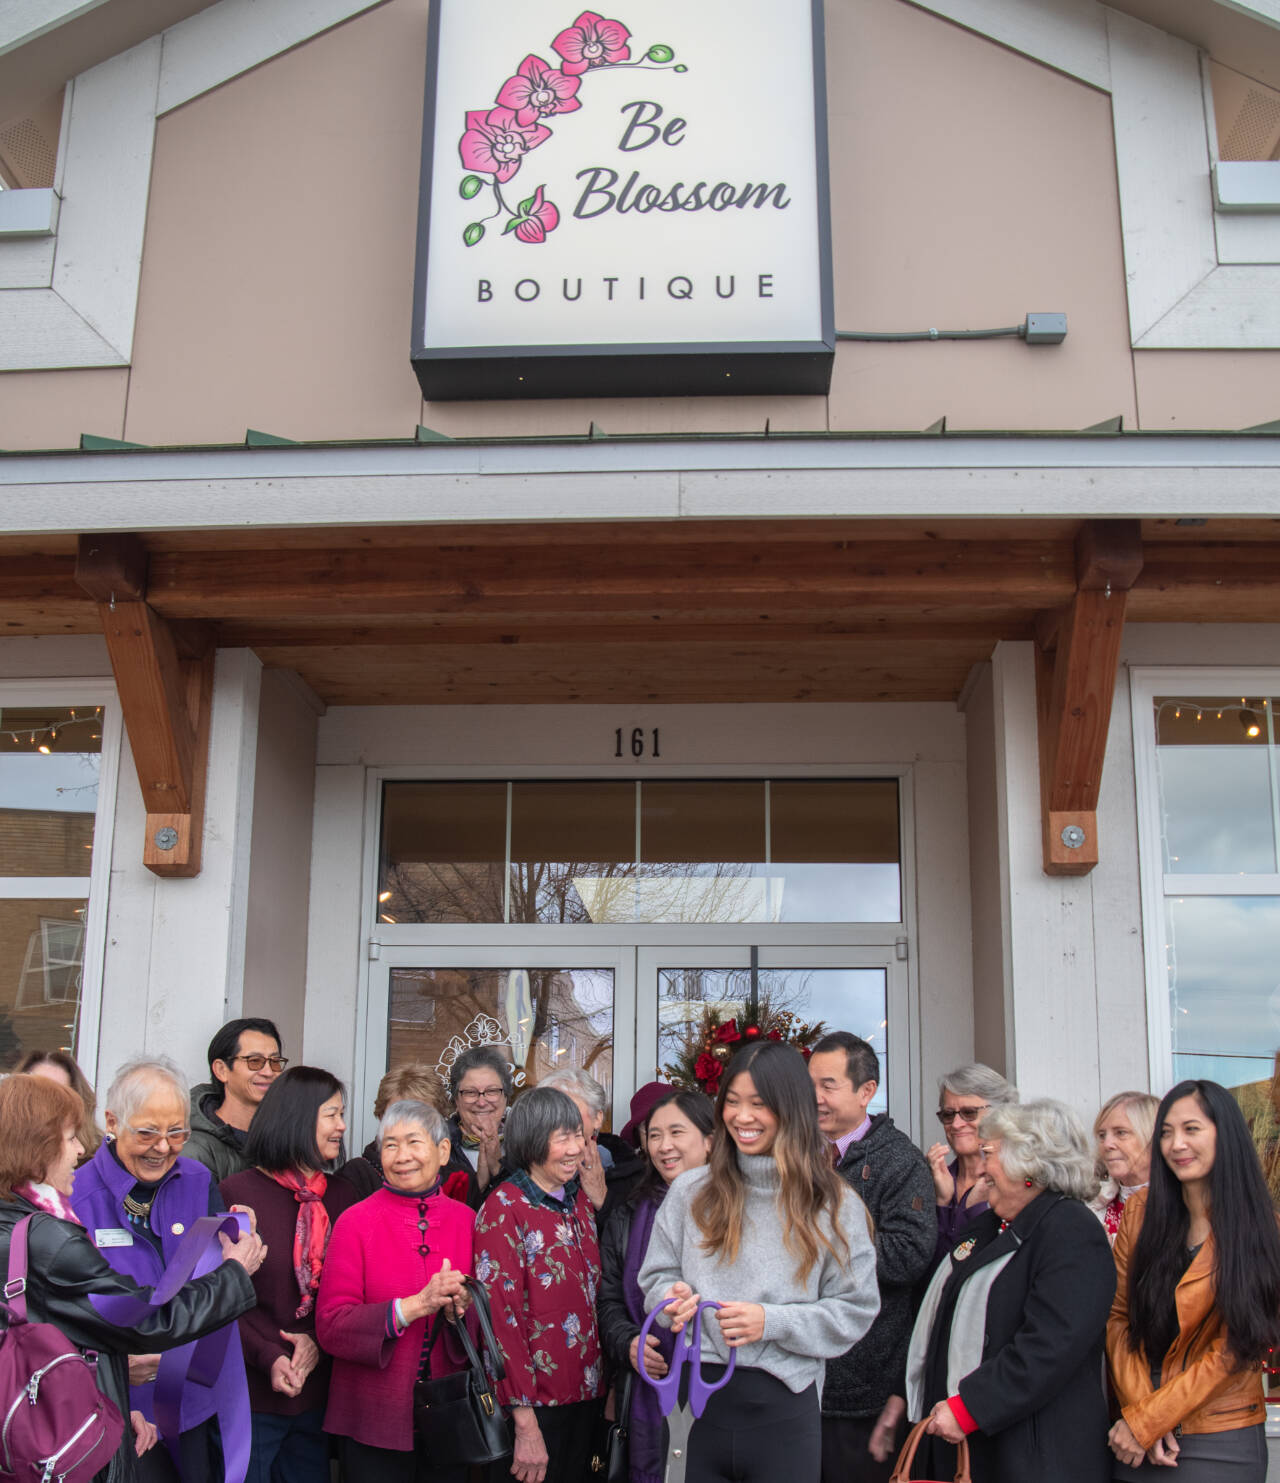 Sequim Gazette photo by Emily Matthiessen / Amanda He (holding scissors) beams in the midst of friends, family and Chamber of Commerce members at the grand opening of her women’s and junior’s clothing shop, Be Blossom Boutique, on Nov. 30.